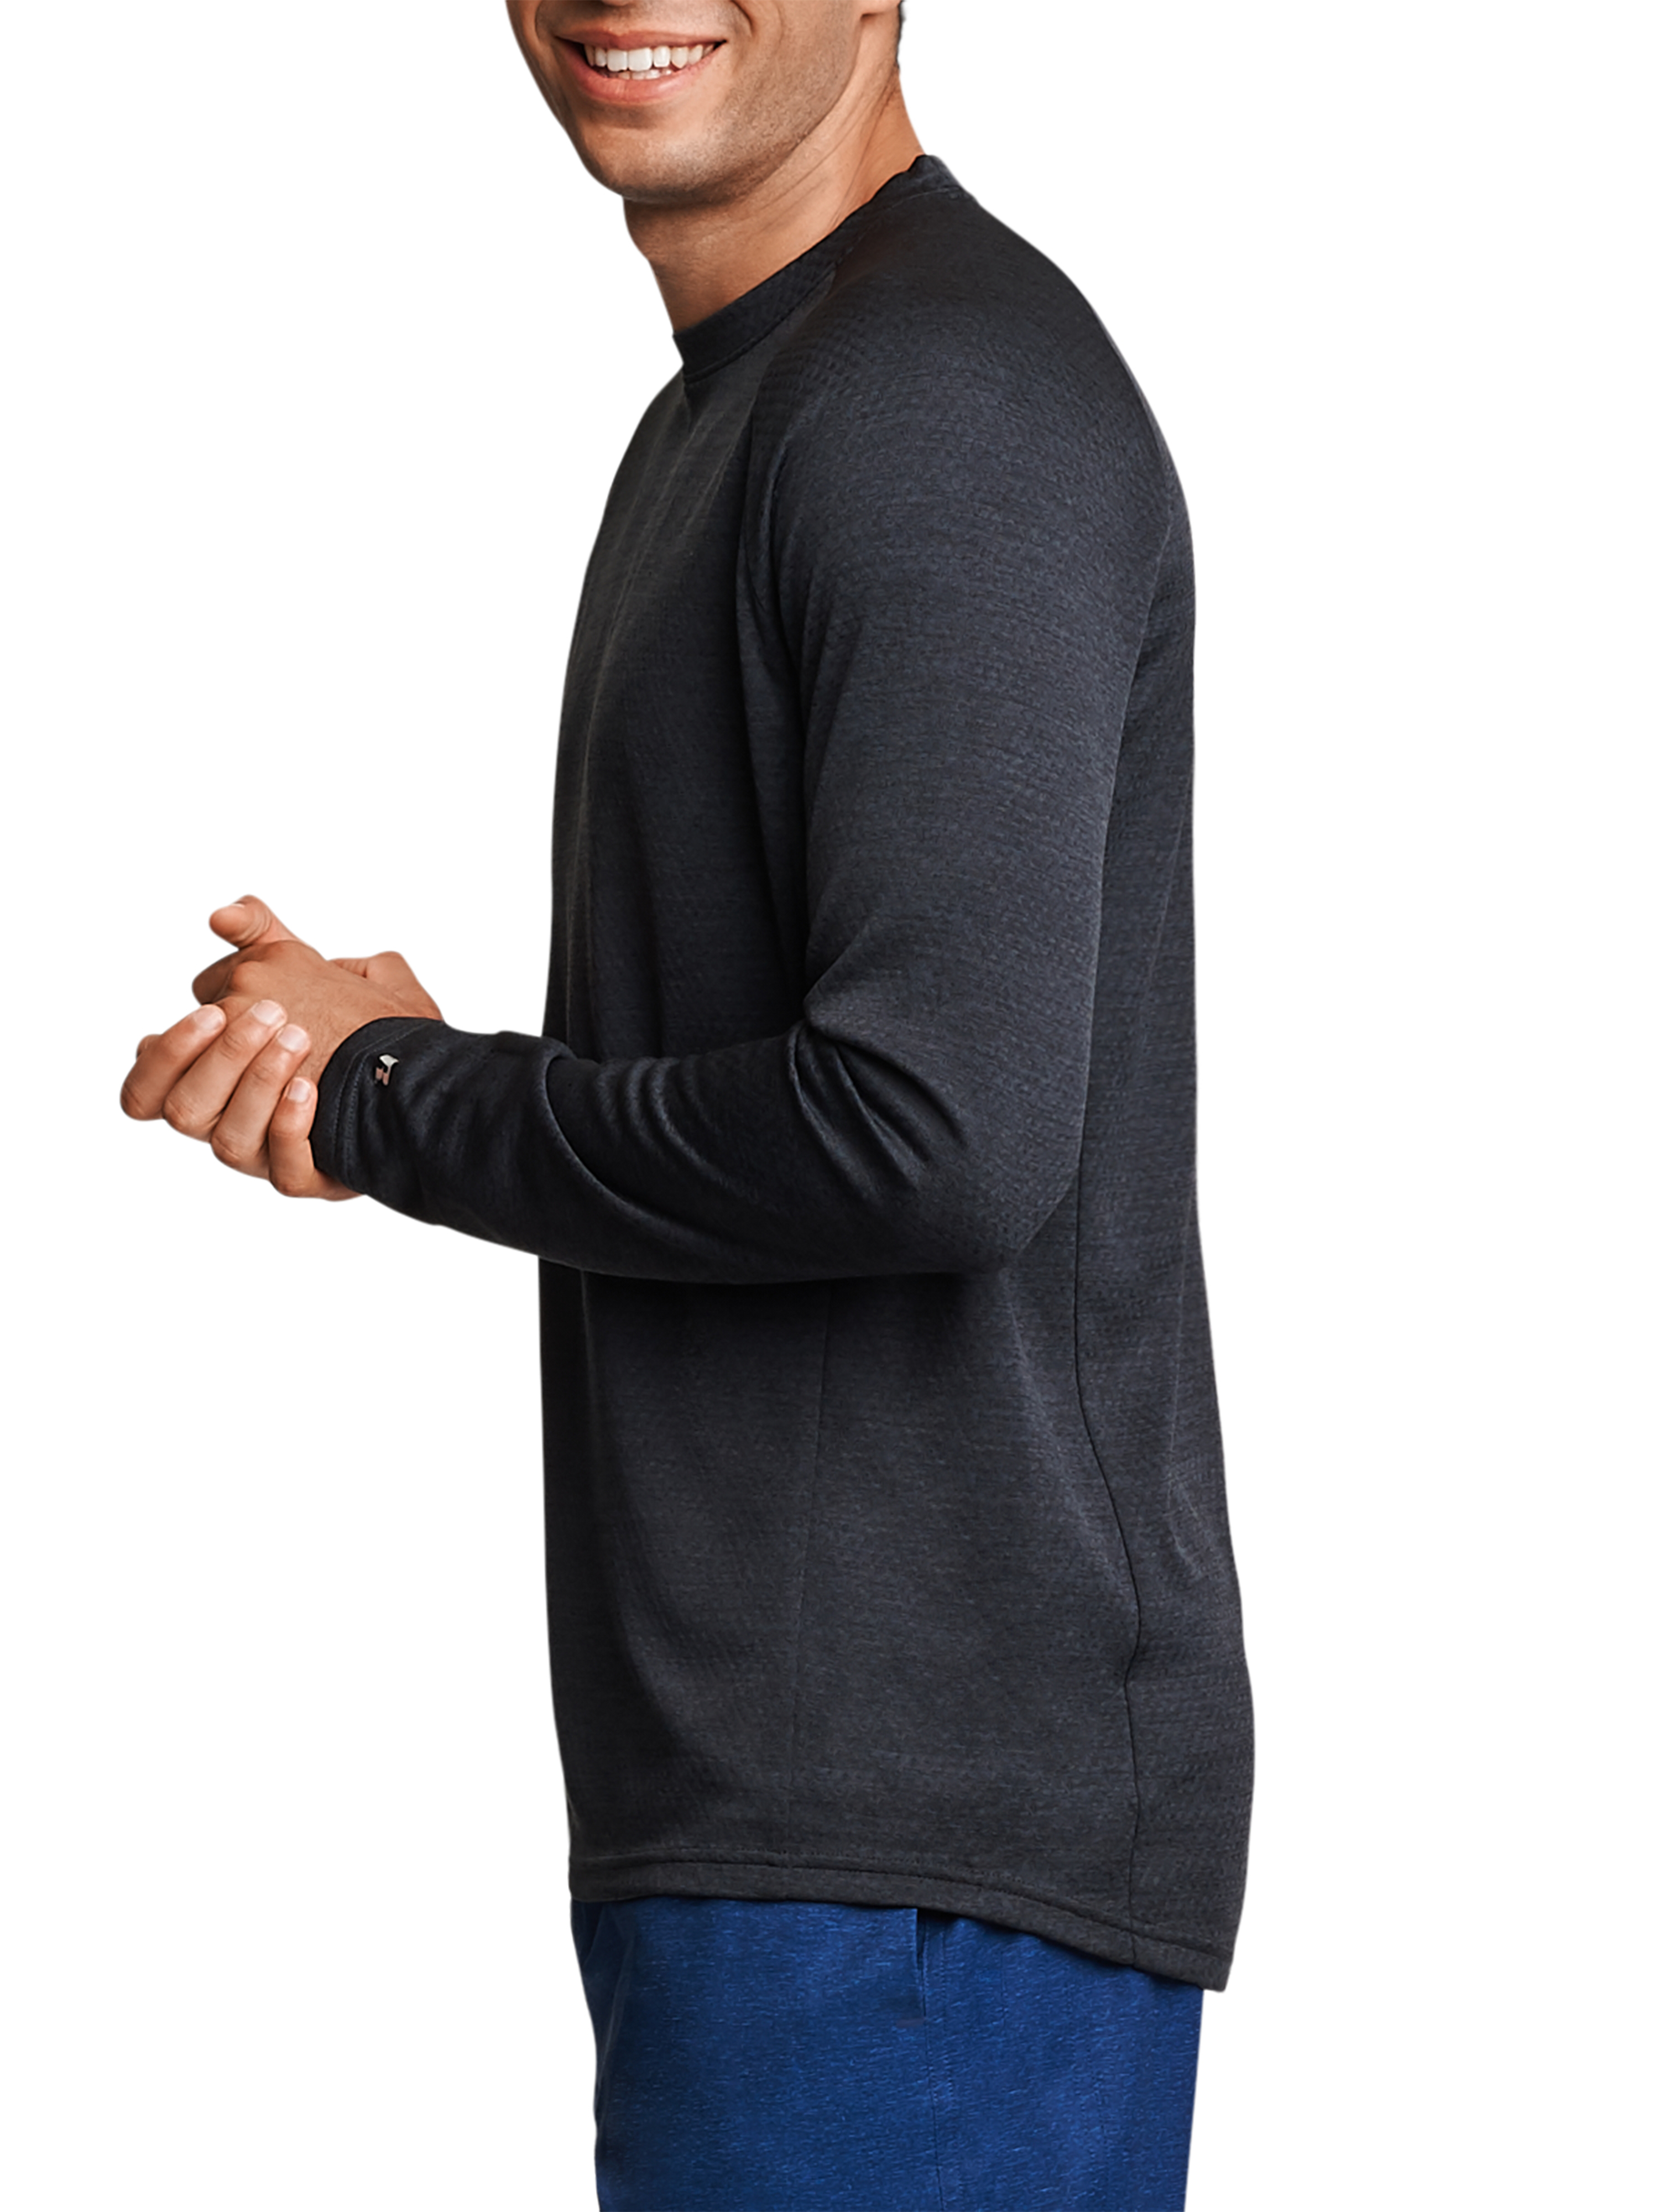 Russell Men's and Big Men's Long Sleeve Performance Tee, up to Size 5XL - image 7 of 7